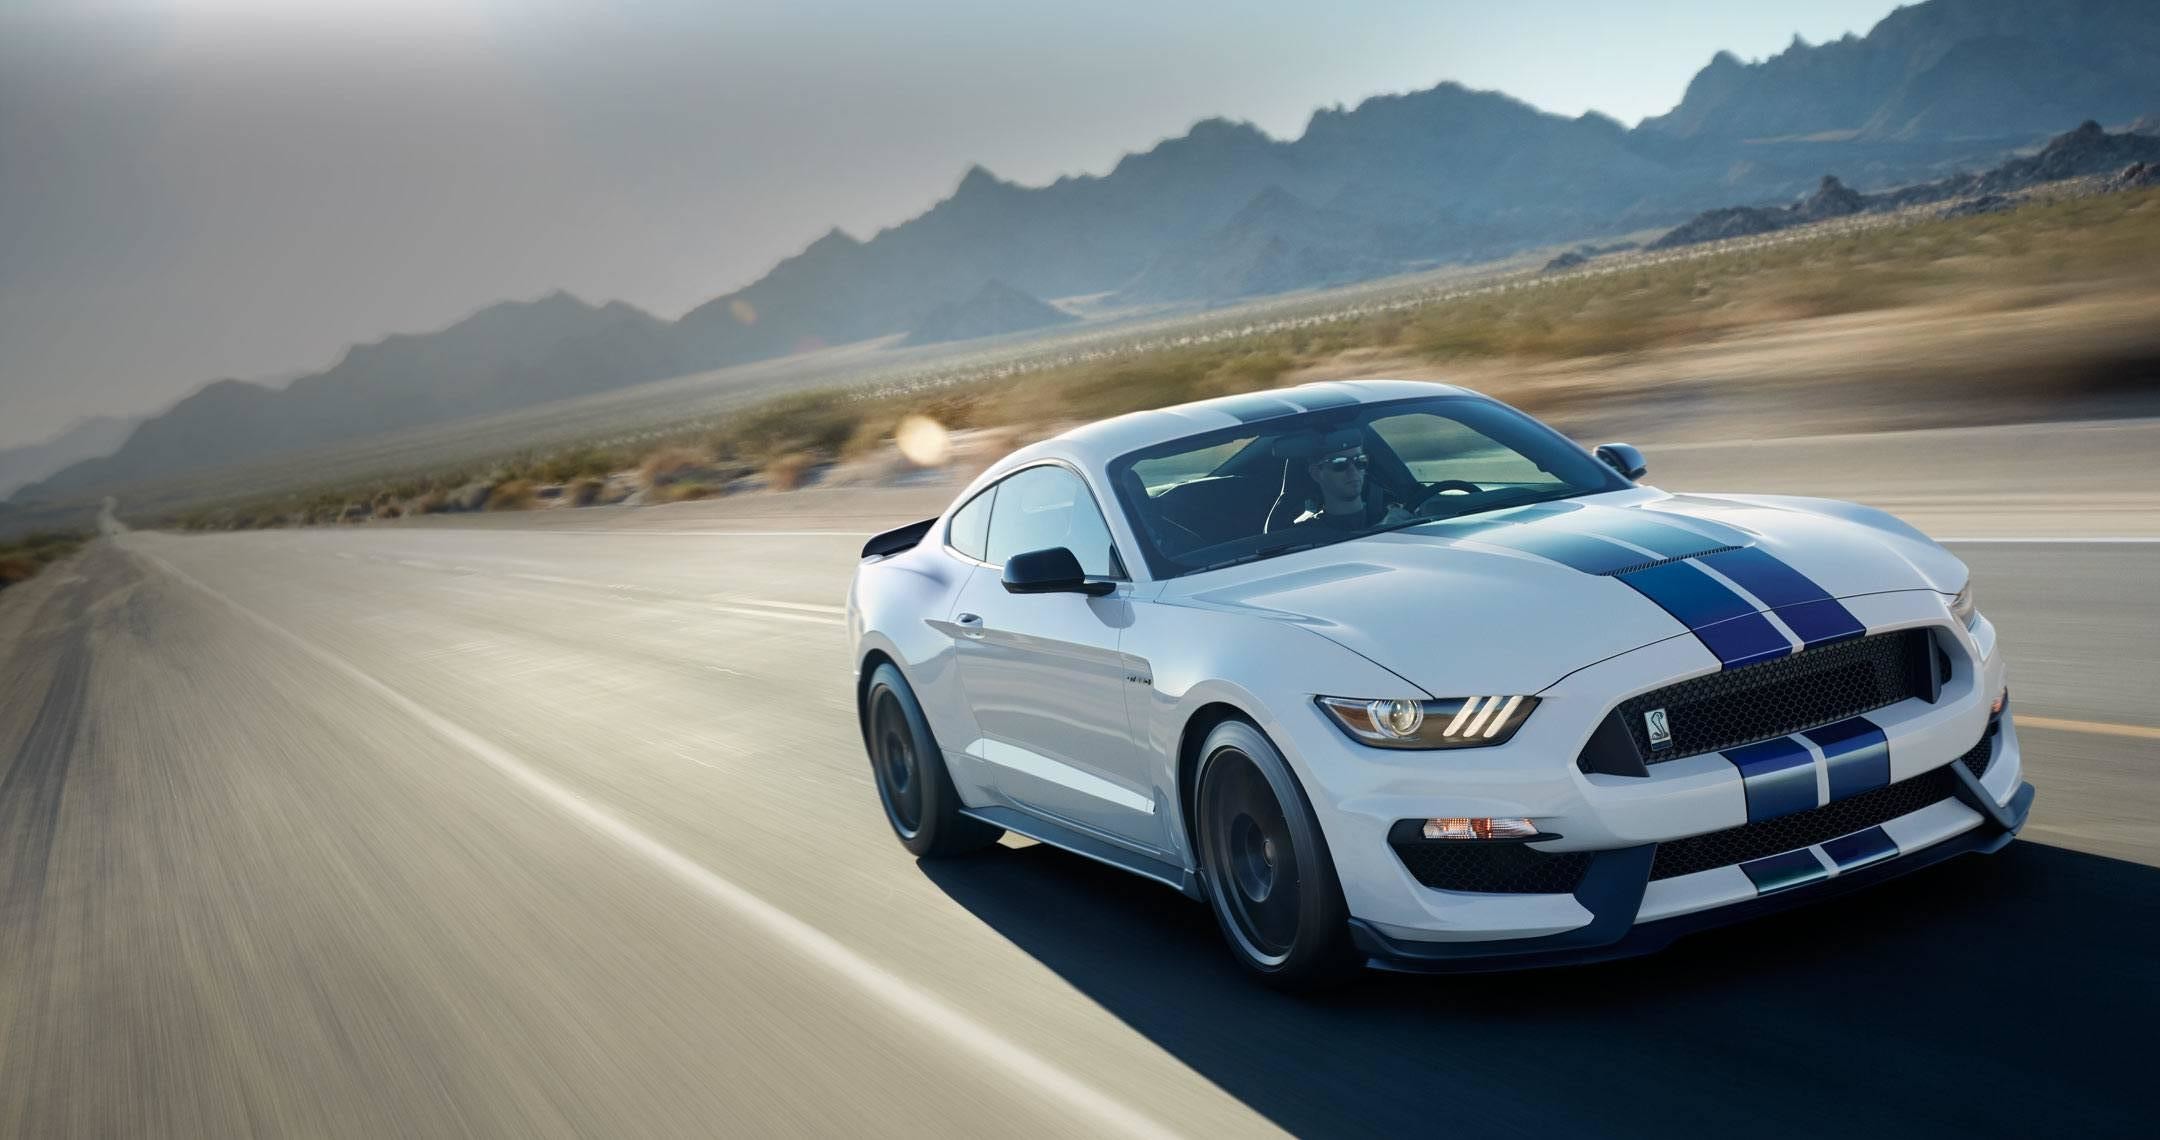 2160x1140 ... 2017 Ford Mustang Shelby FP350S 12 FORD MUSTANG SHELBY MOTION WALLPAPERS  ...